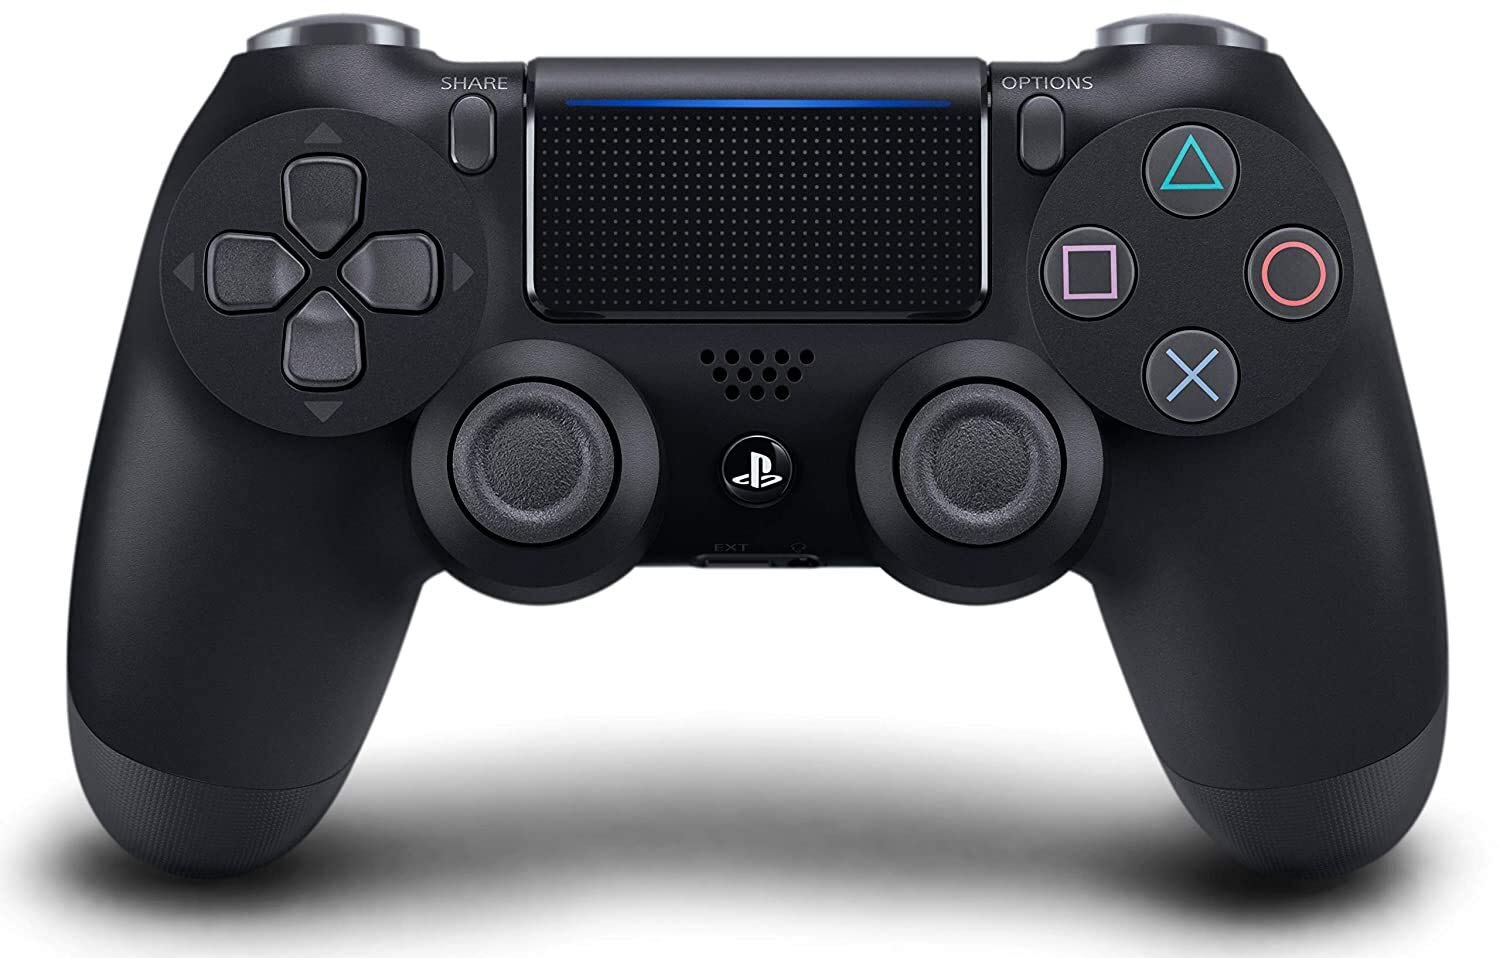 Dualshock 4 controller and PC